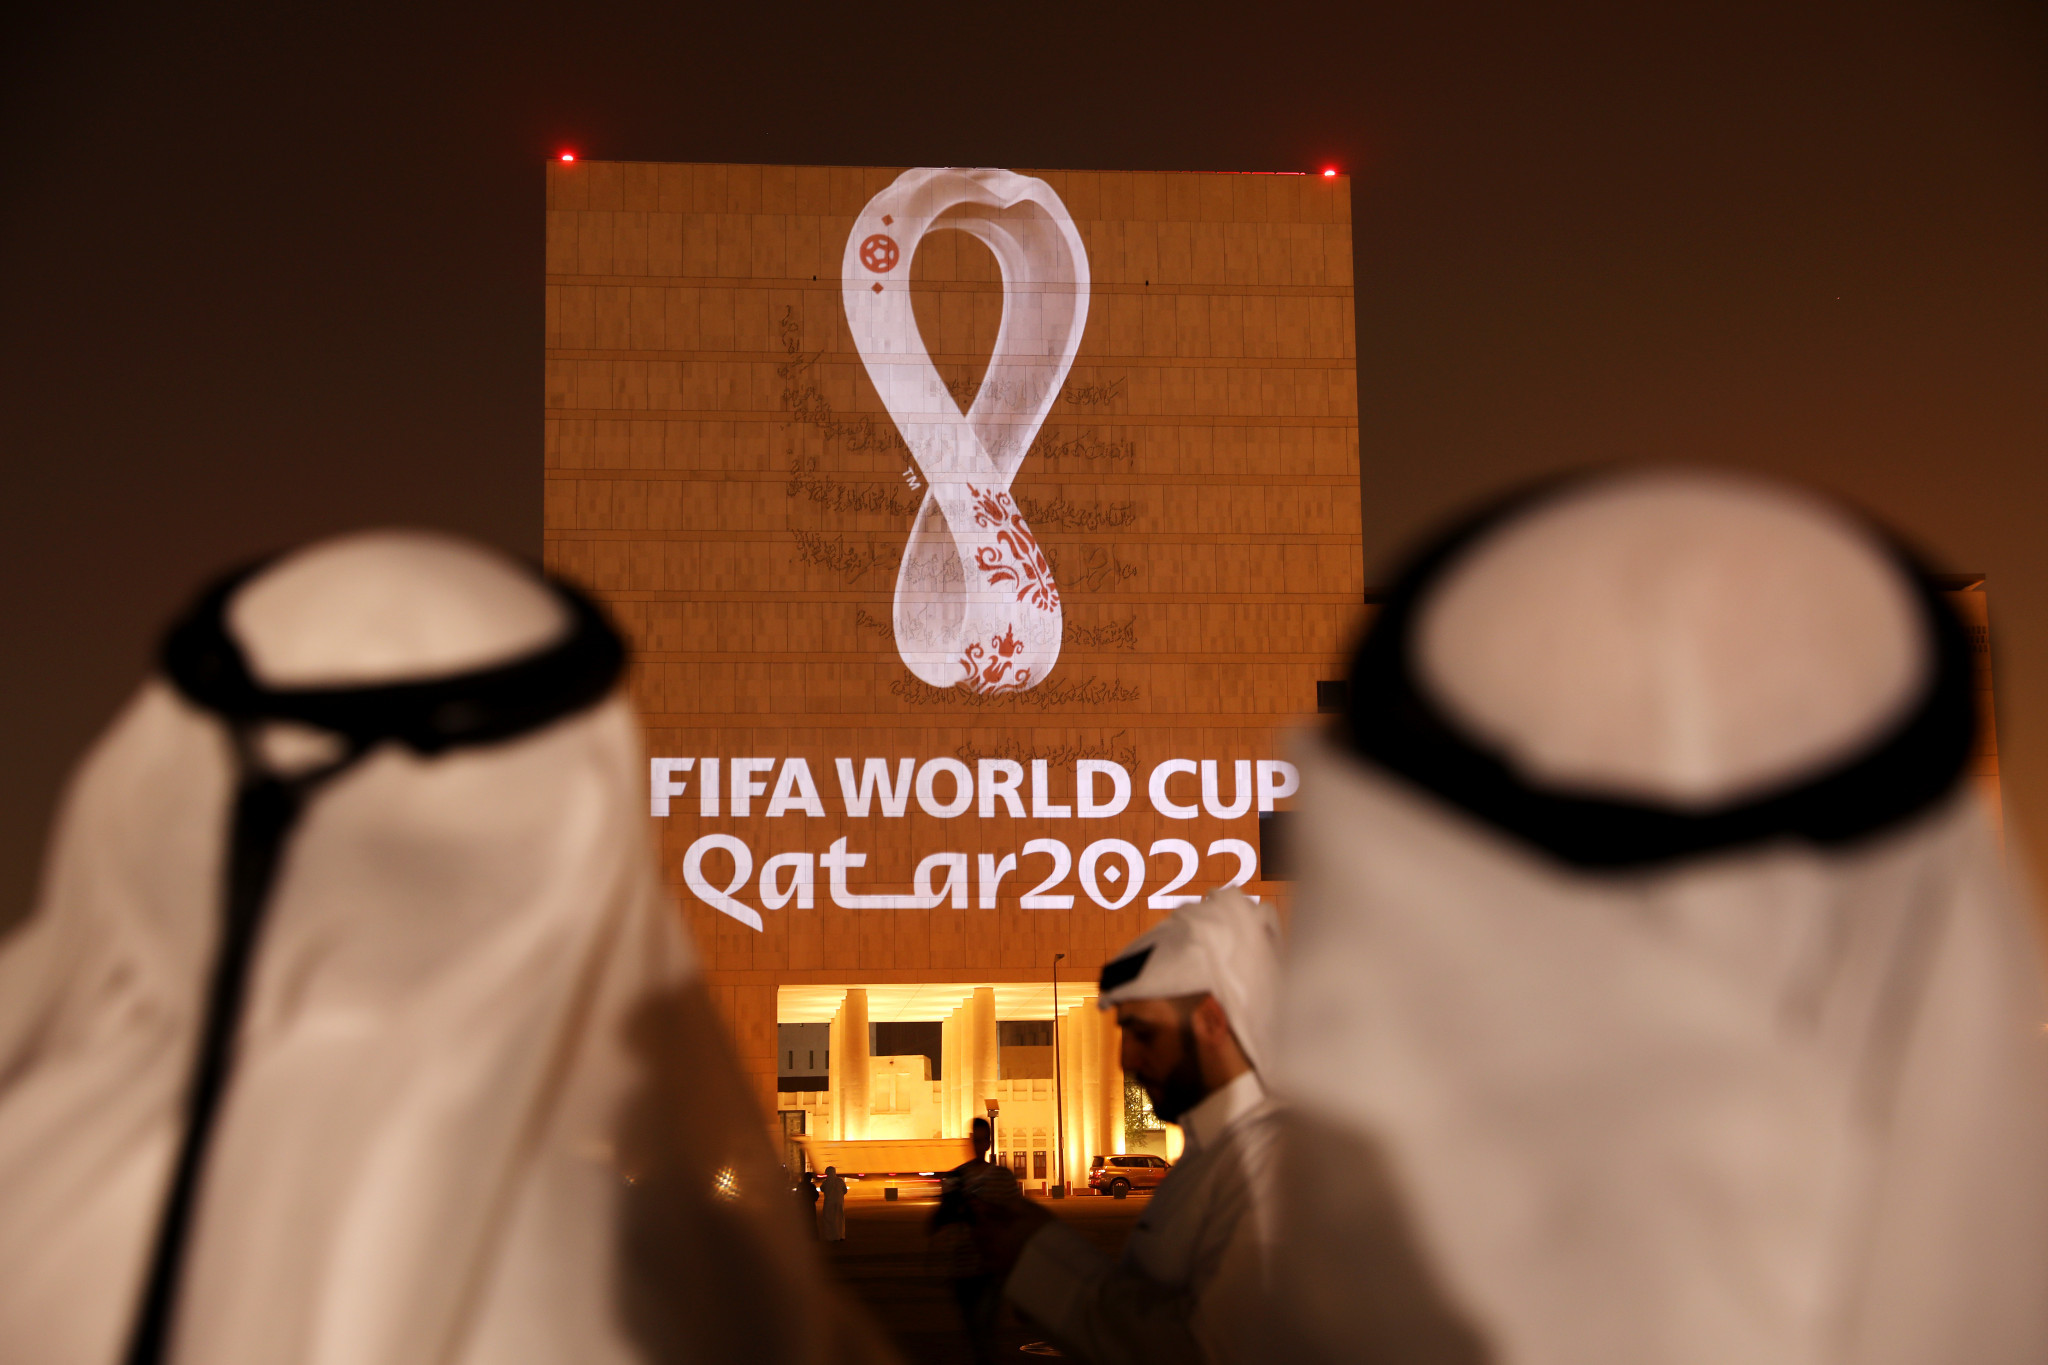 The Middle East has never before hosted the FIFA World Cup ©Getty Images